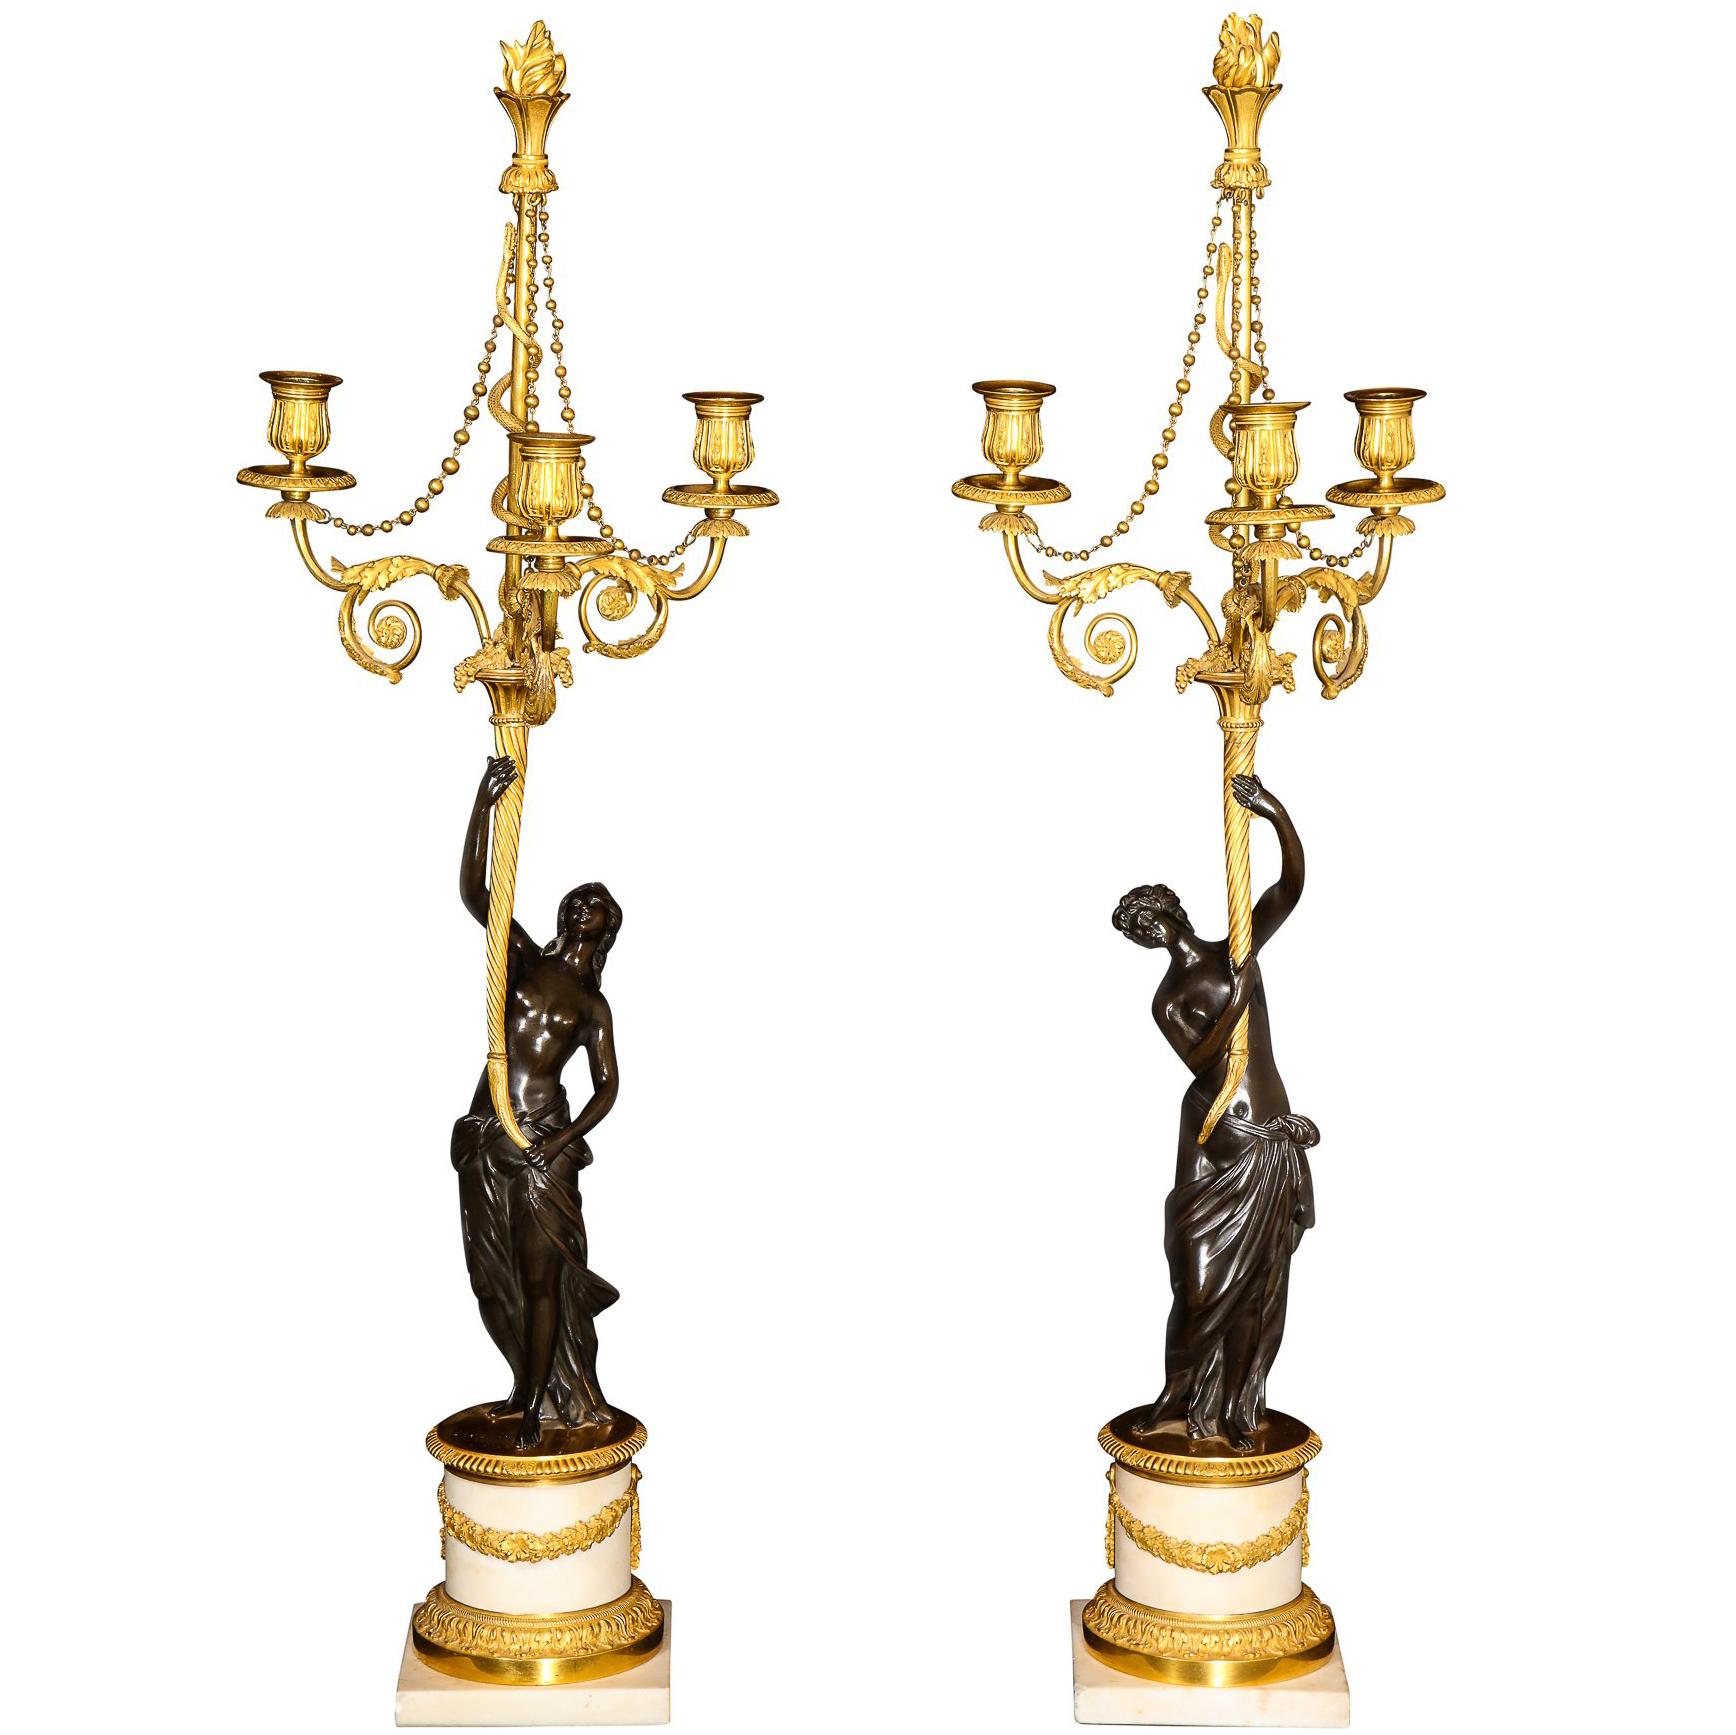 Pair of Large Antique French Louis XVI Figural Gilt Bronze & Marble Candelabras